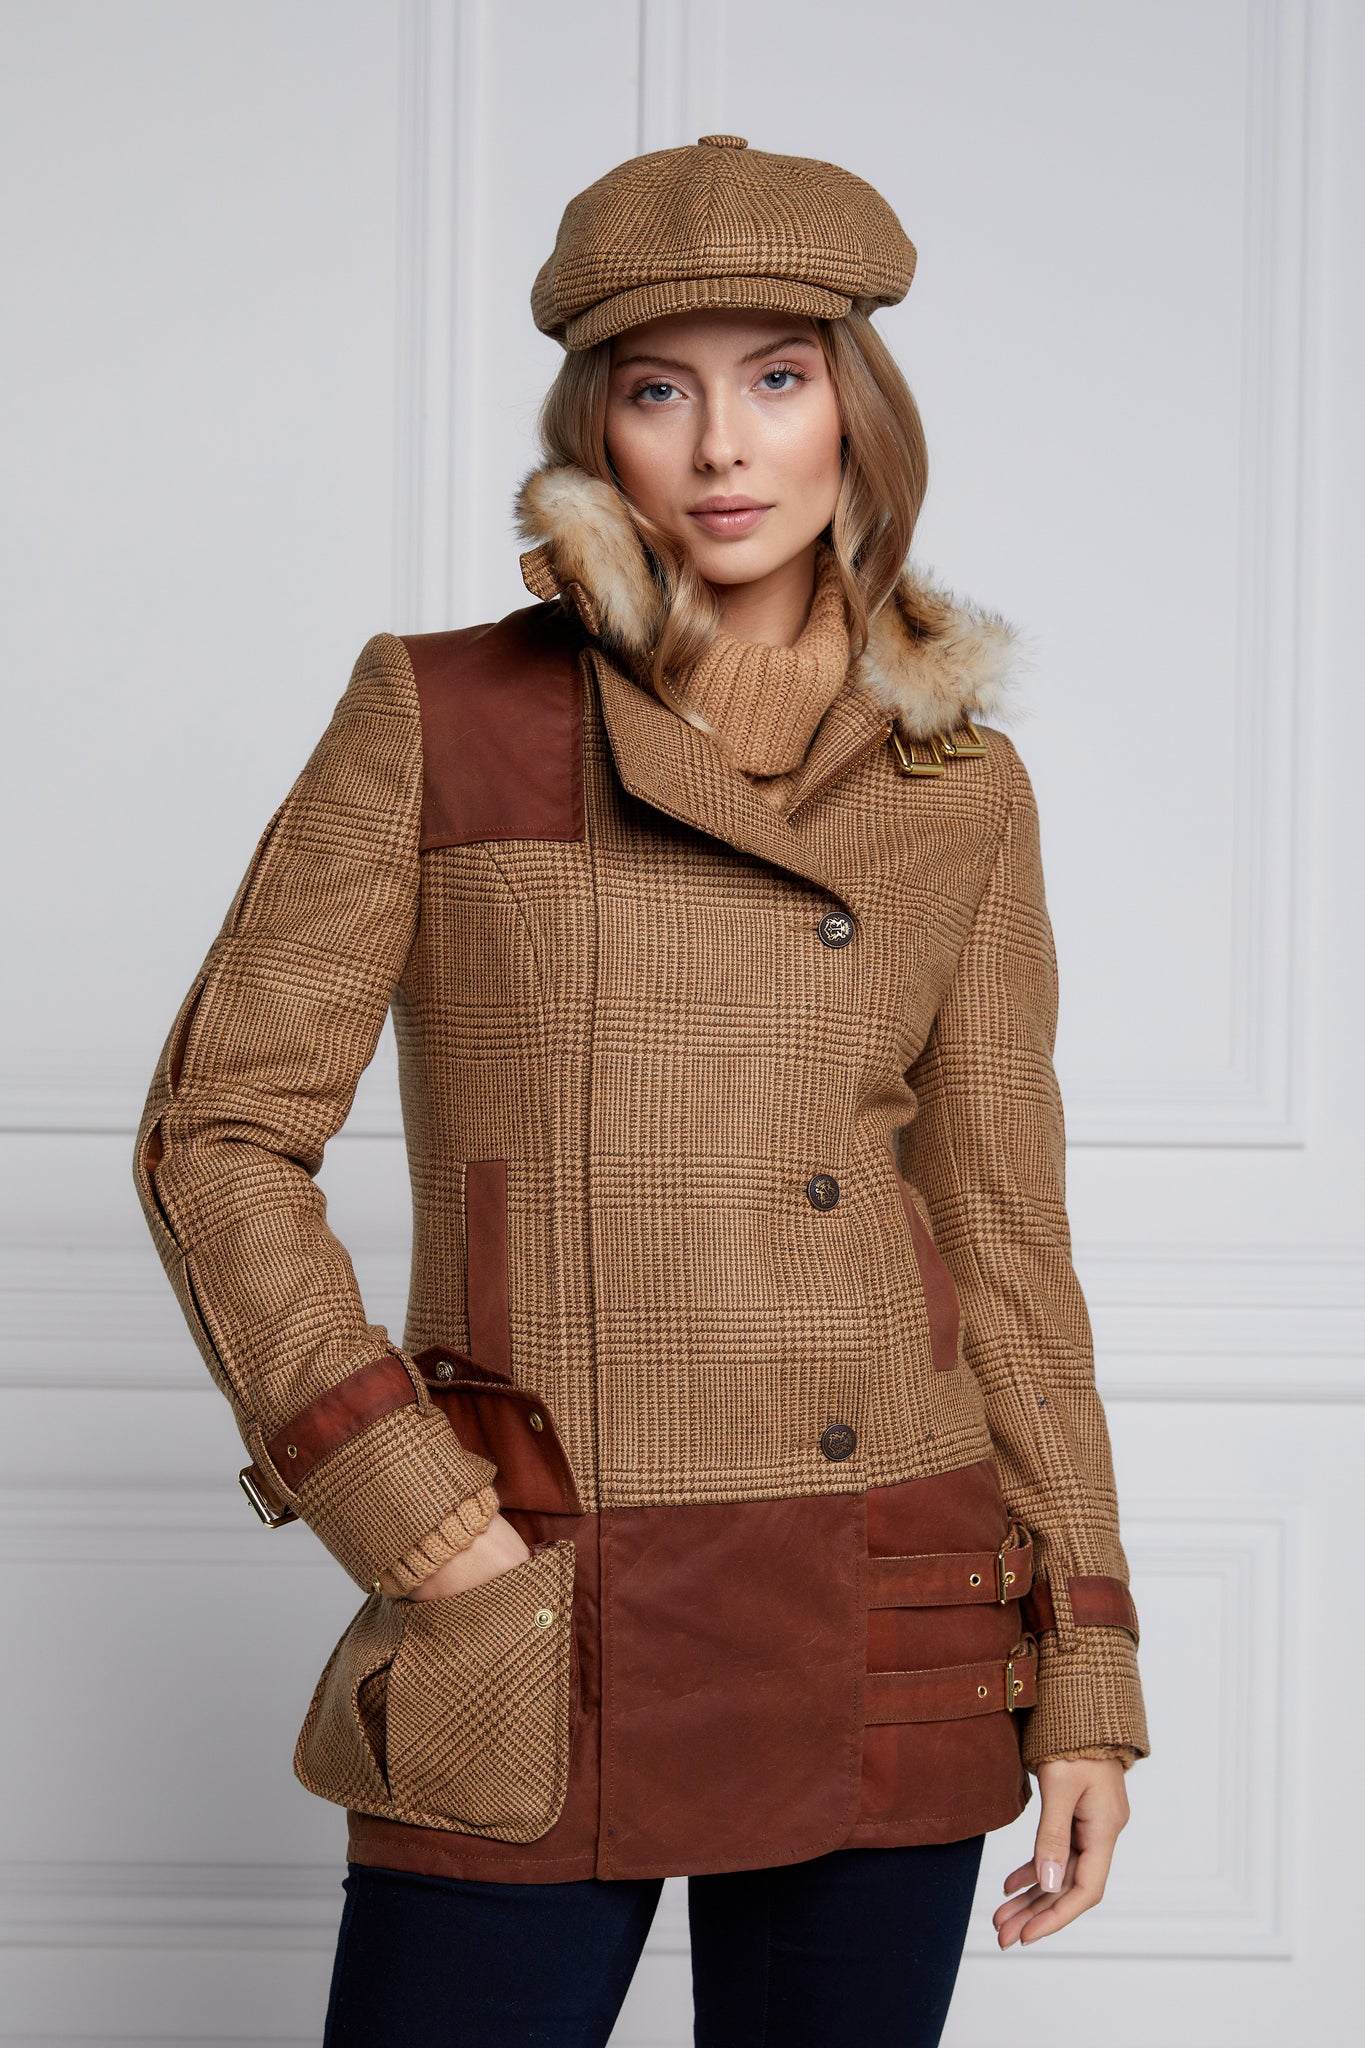  womens fitted field jacket in tawny and brown check tweed trimmed with contrast tan wax fabric on shoulder across back and on the hip with faux fur trim around the neck finished with horn button fastenings an buckles on the collar cuffs and hip